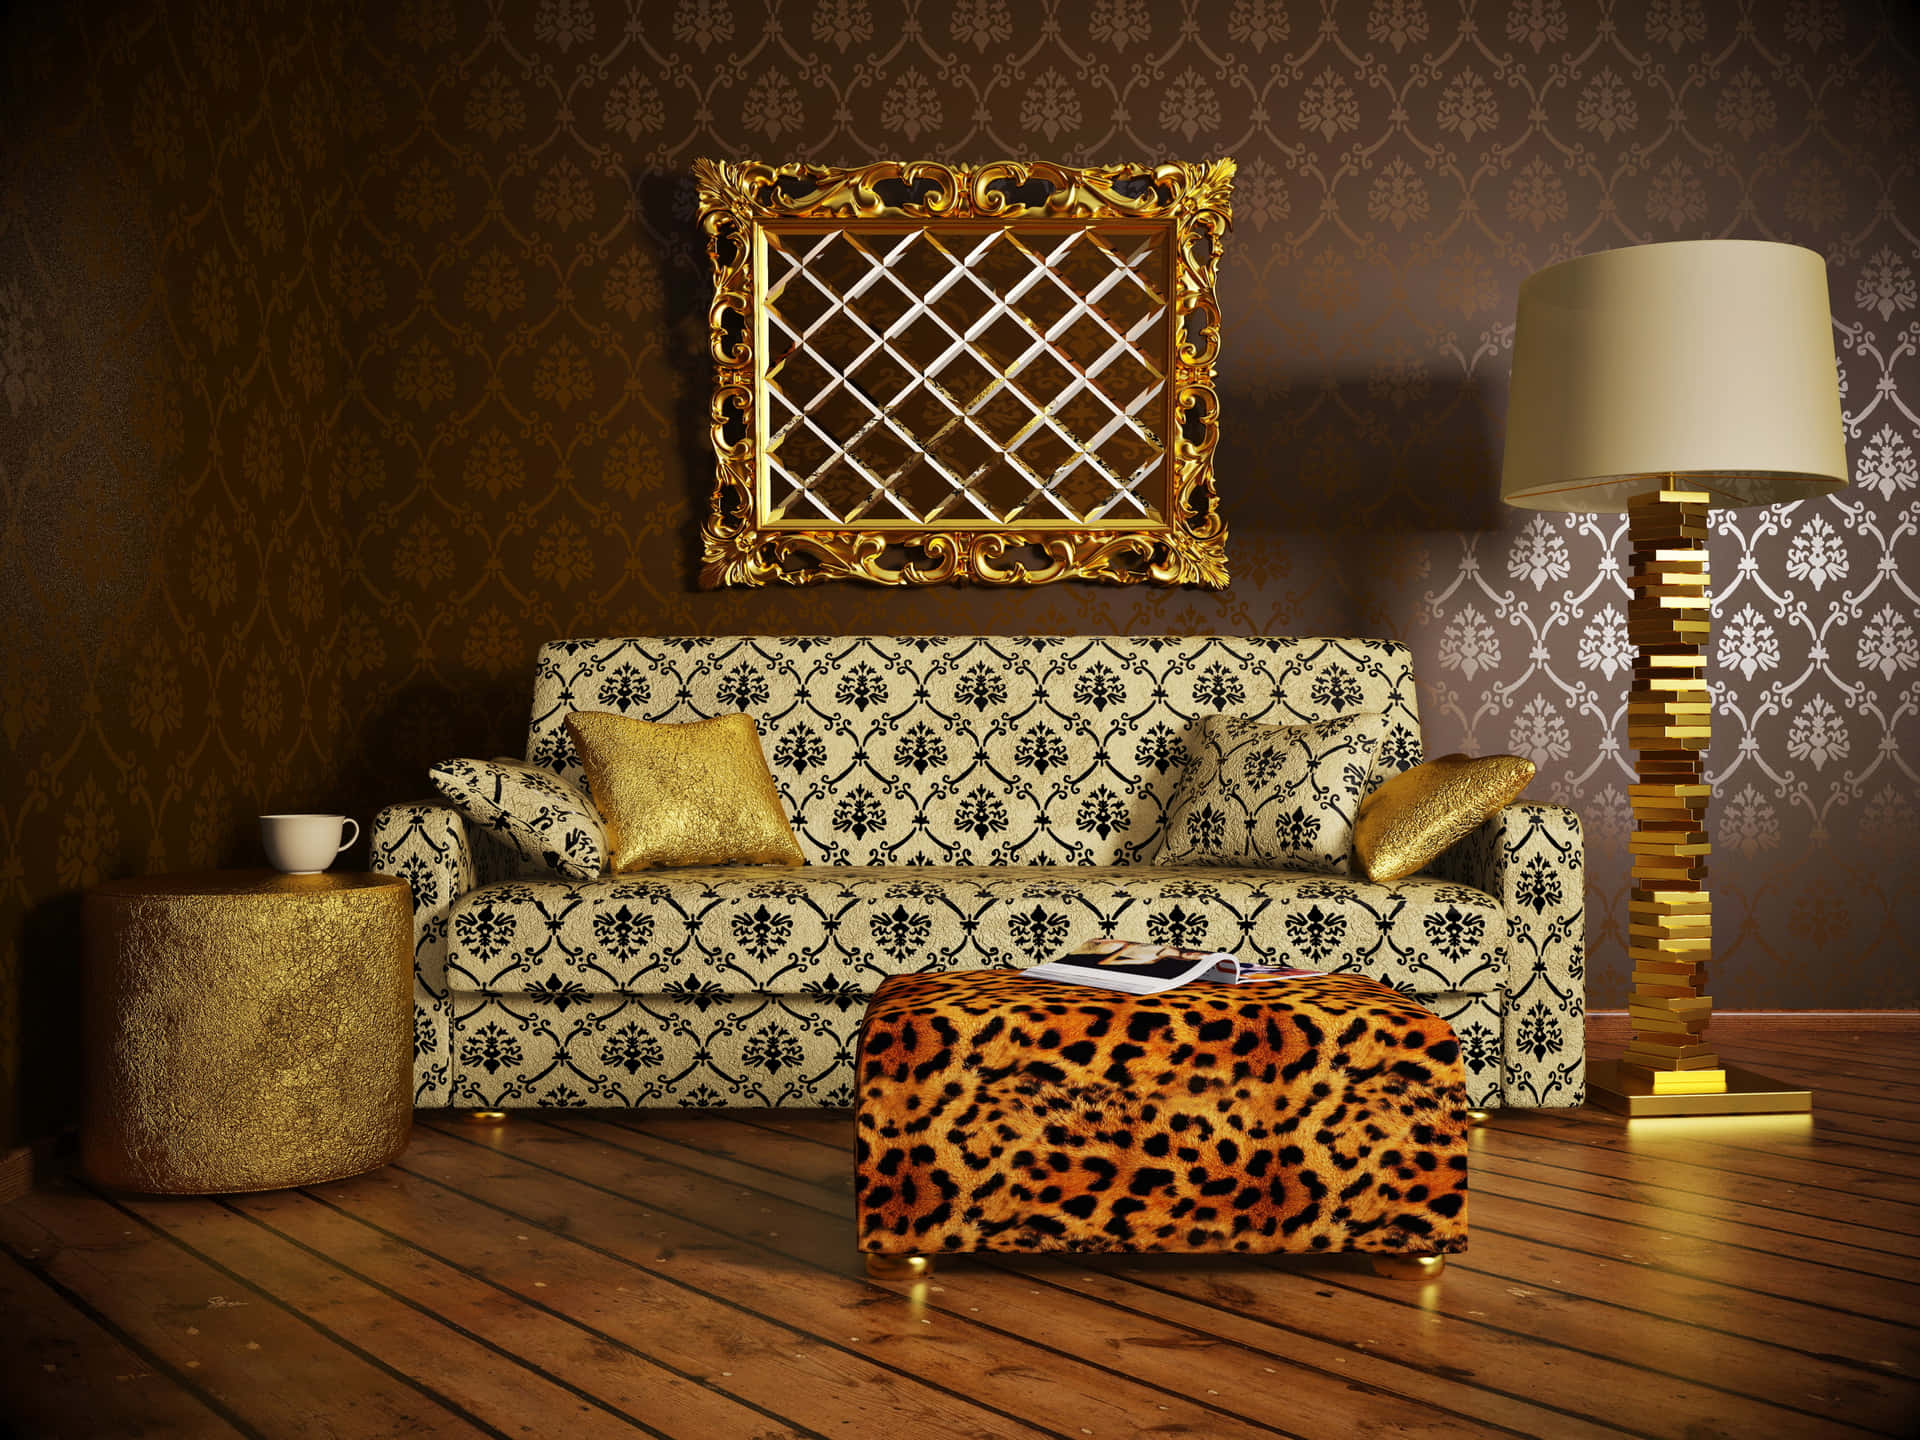 Sophisticated Vintage Patterned Couch Wallpaper